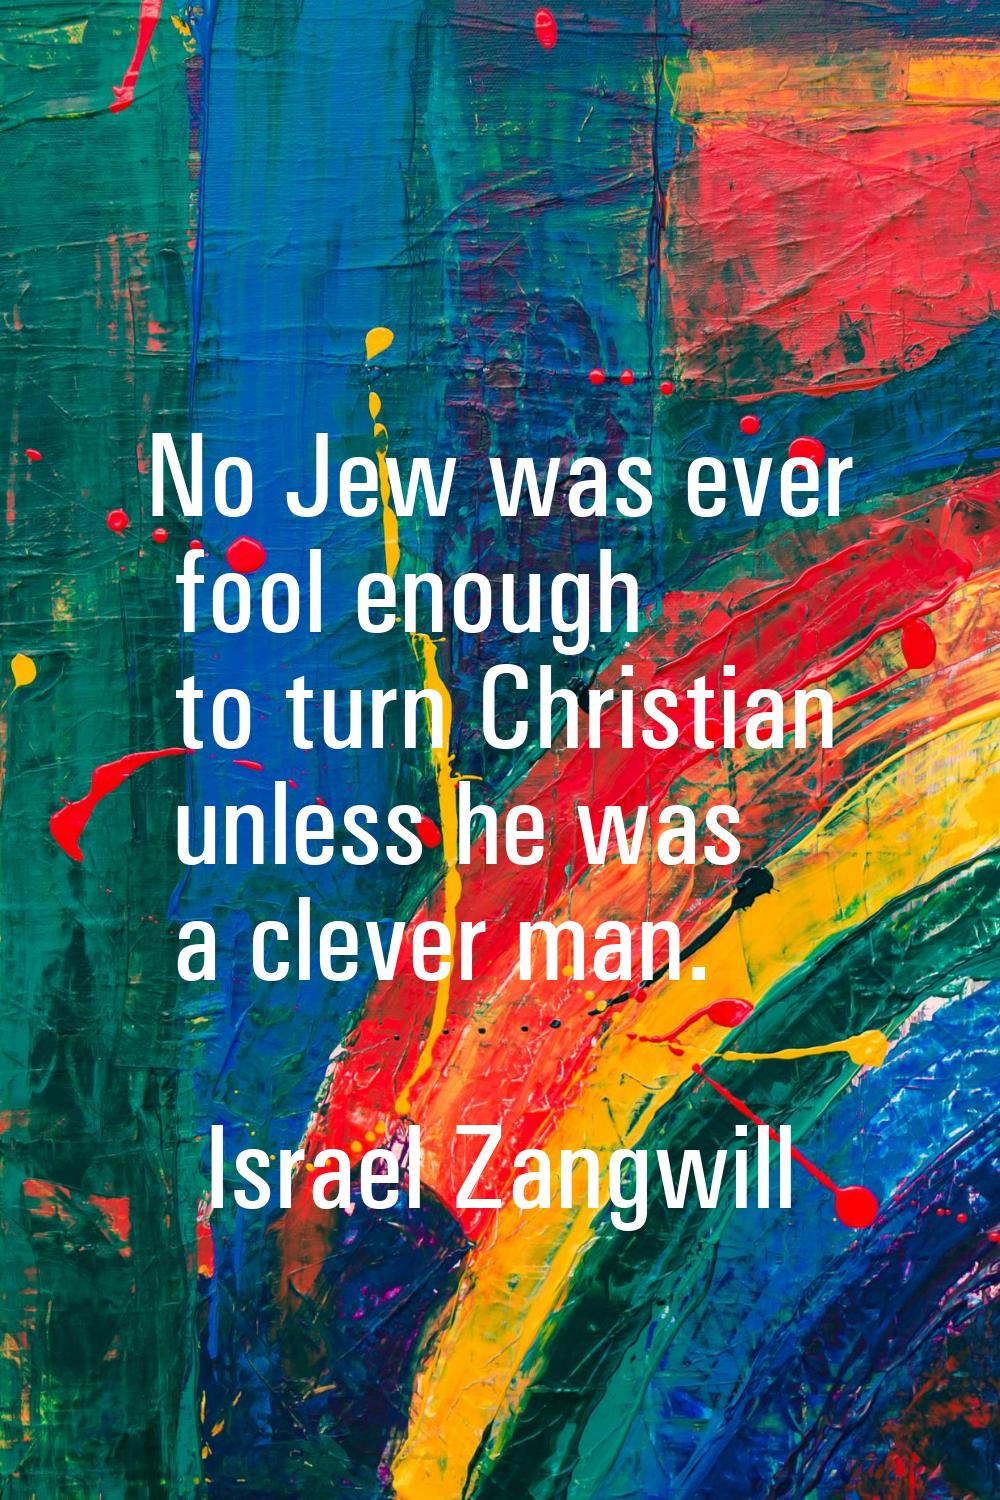 No Jew was ever fool enough to turn Christian unless he was a clever man.